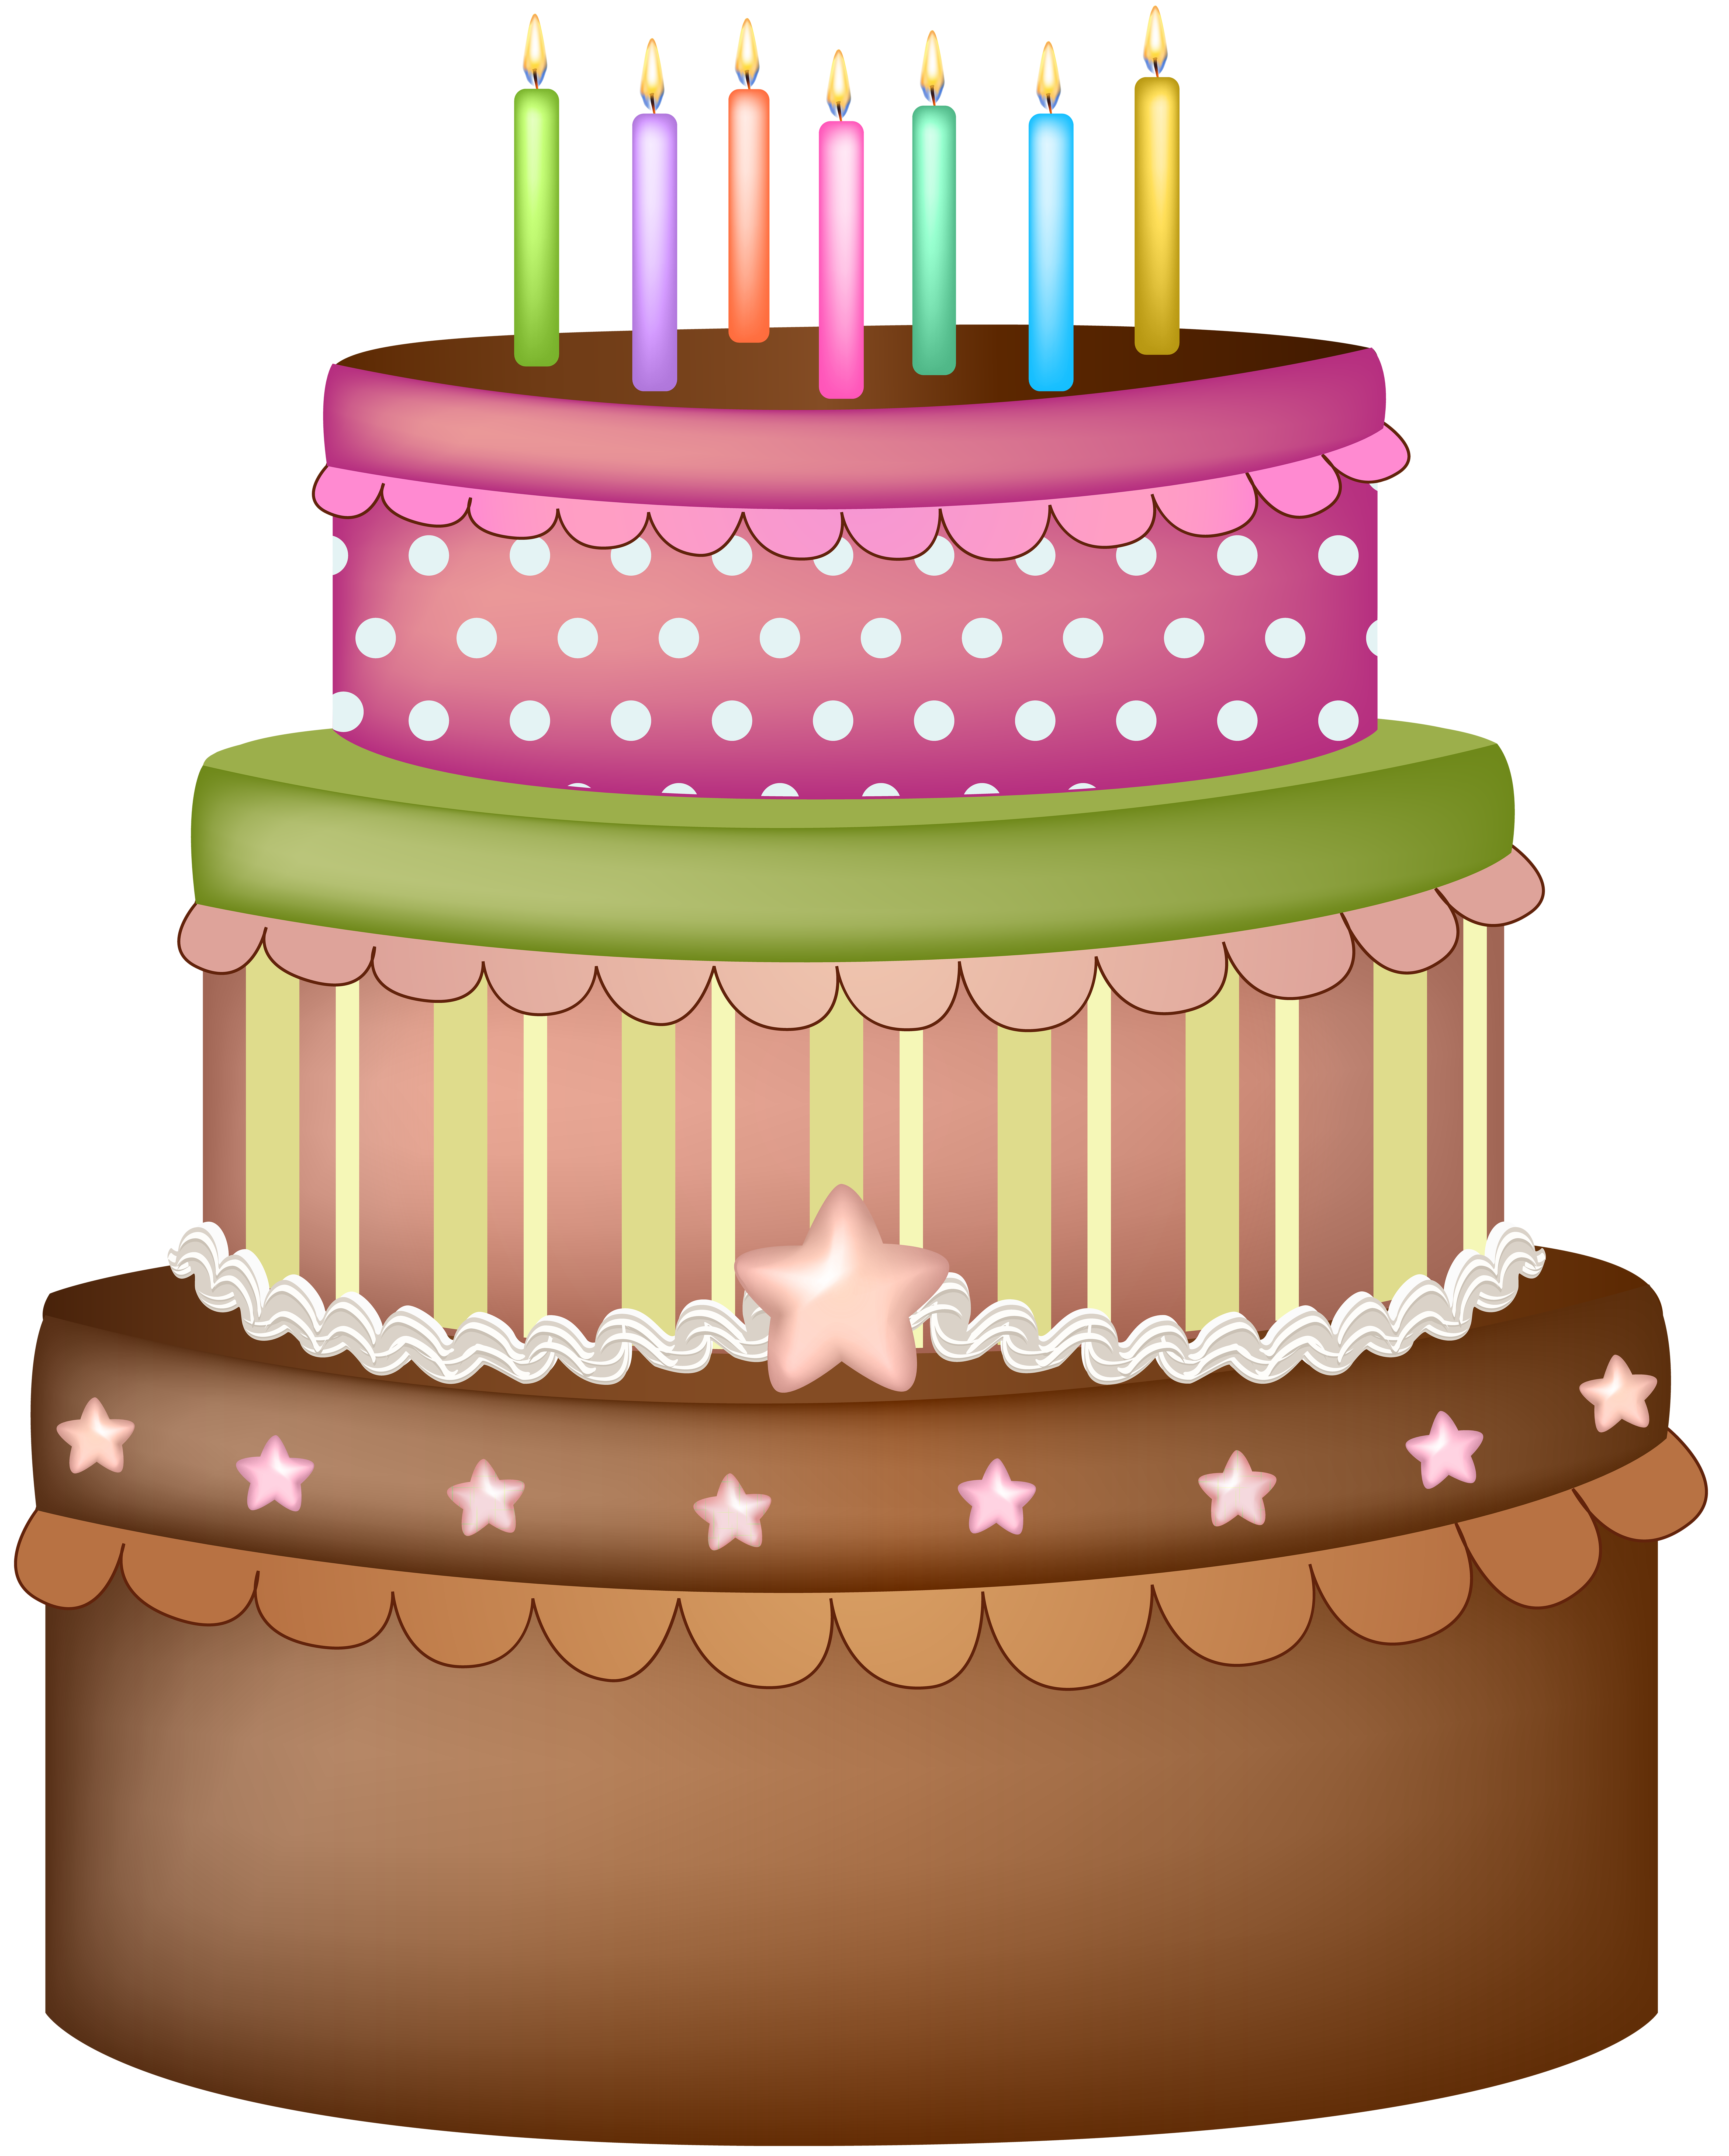 Cake birthday PNG transparent image download, size: 1136x1122px